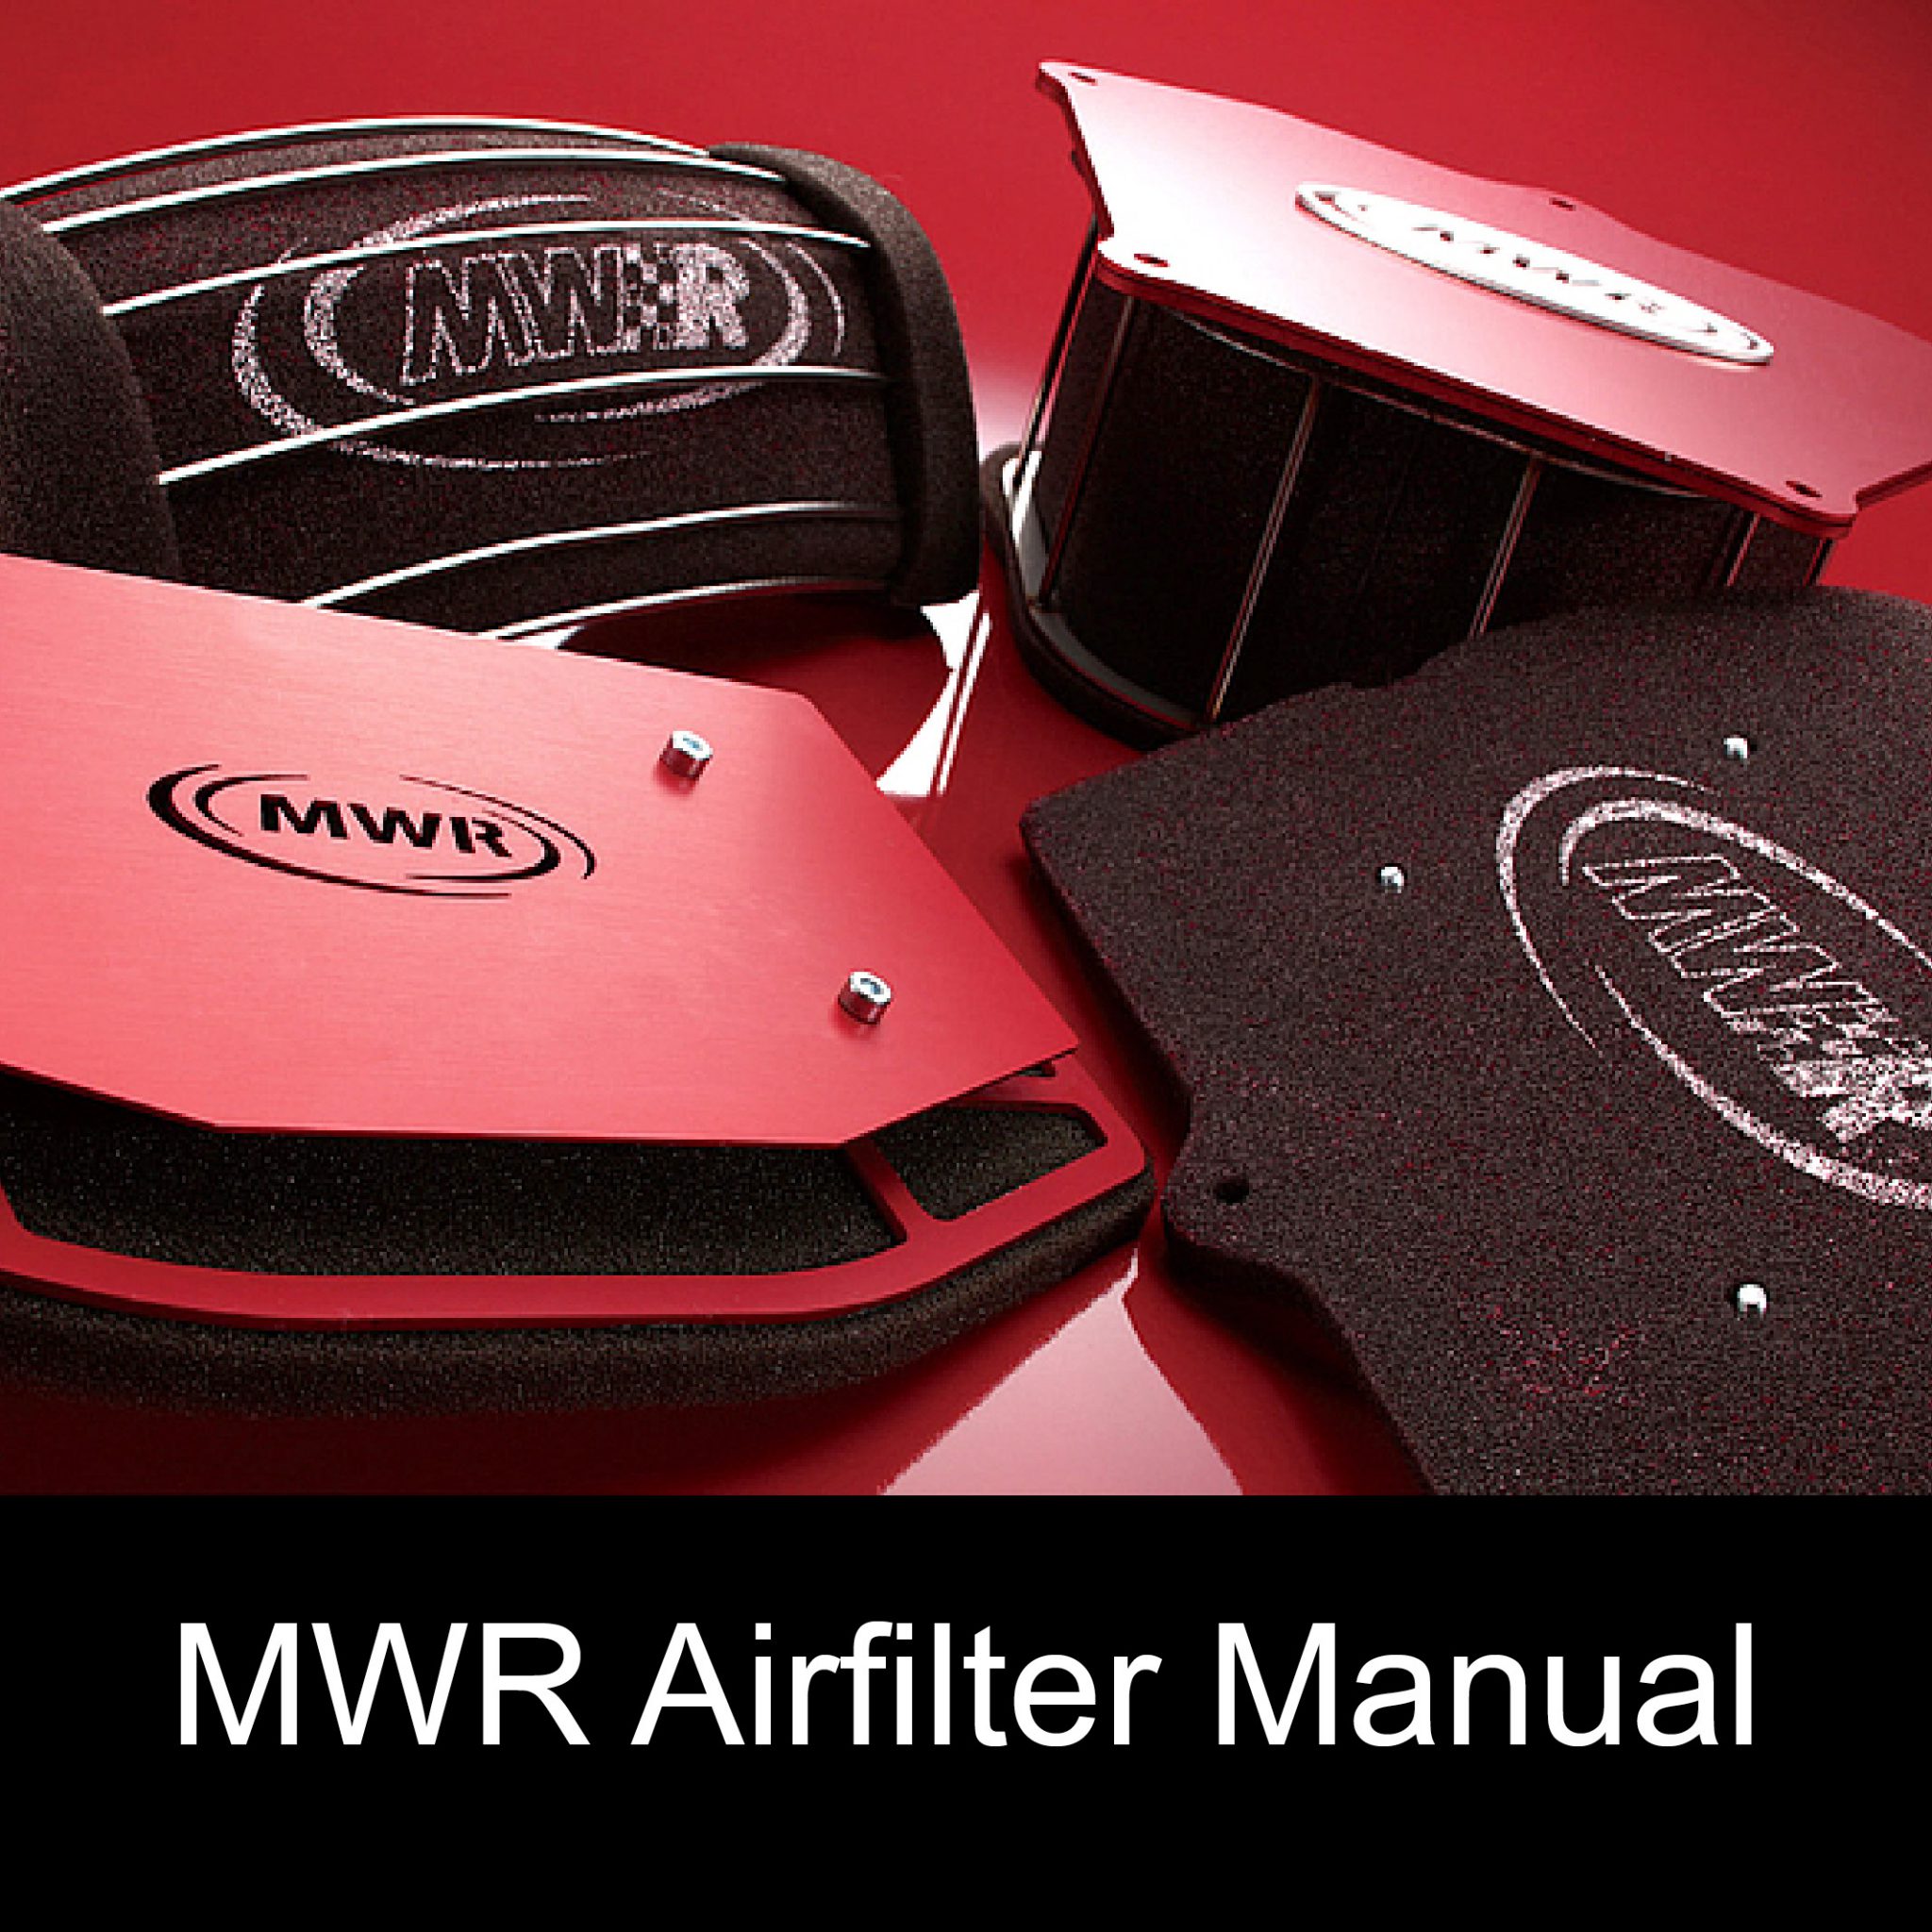 MWR Airfilter Manual tile 1